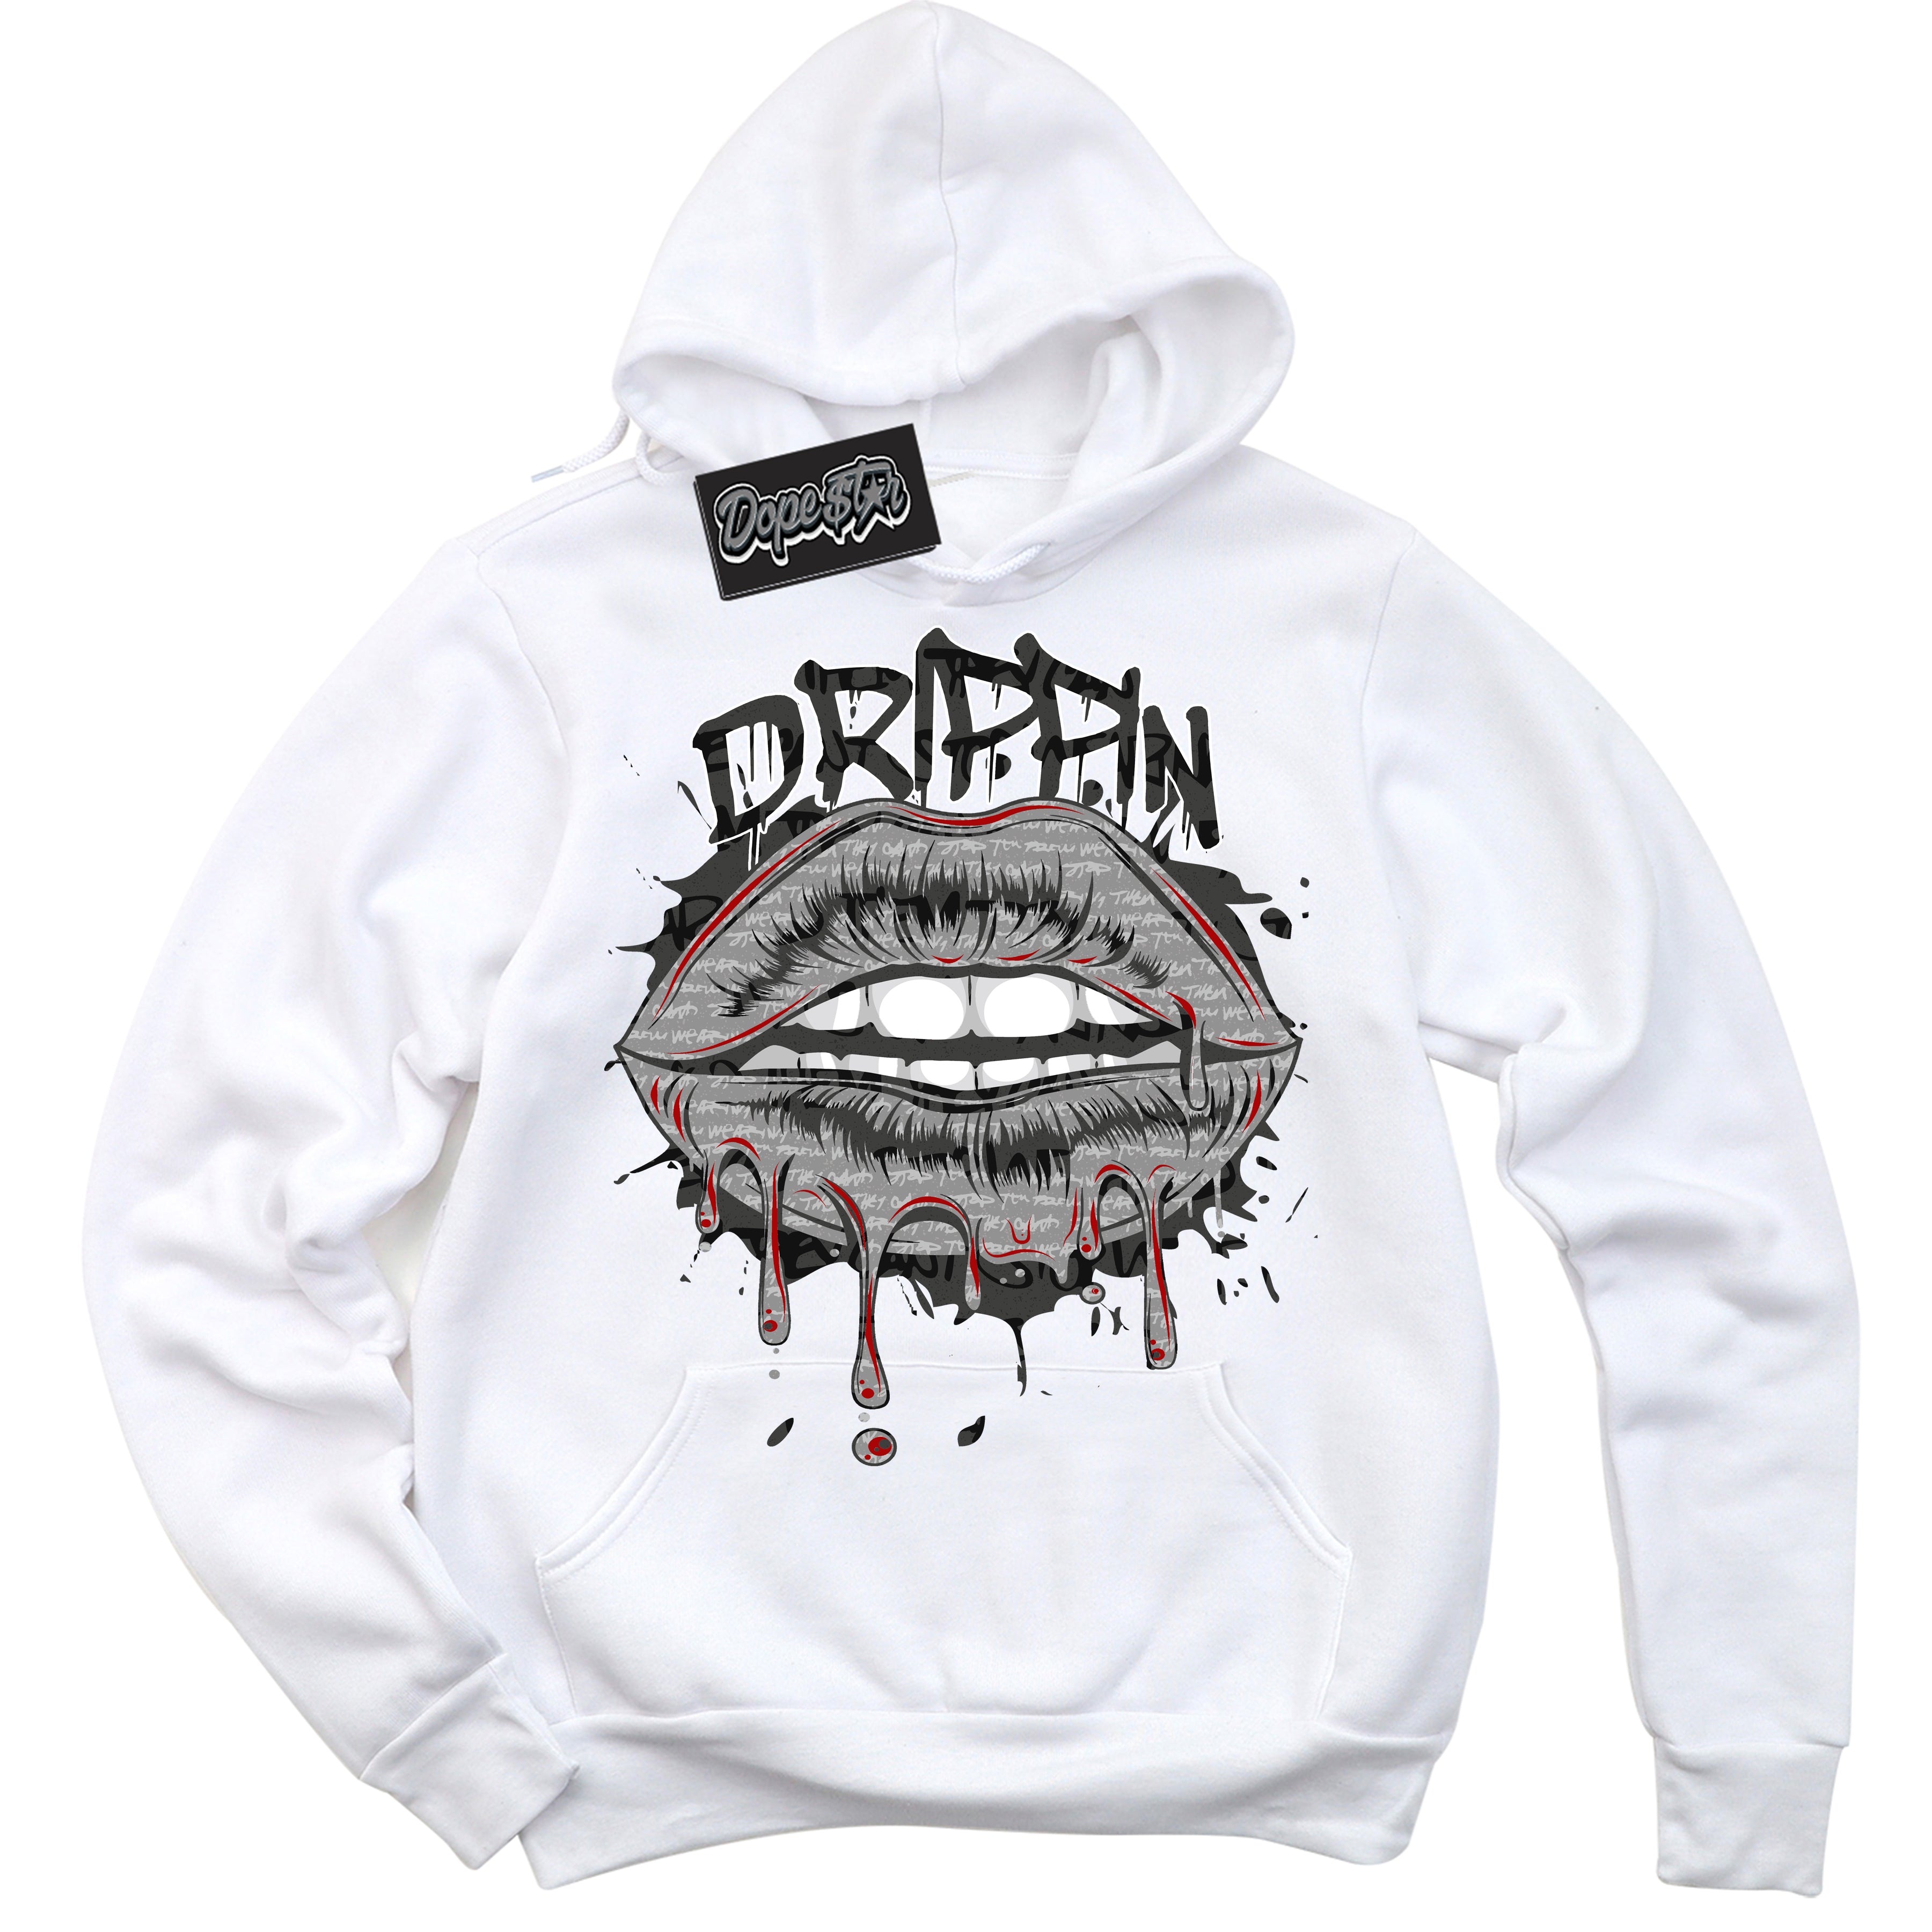 Cool White Hoodie with “ Drippin ”  design that Perfectly Matches Rebellionaire 1s Sneakers.